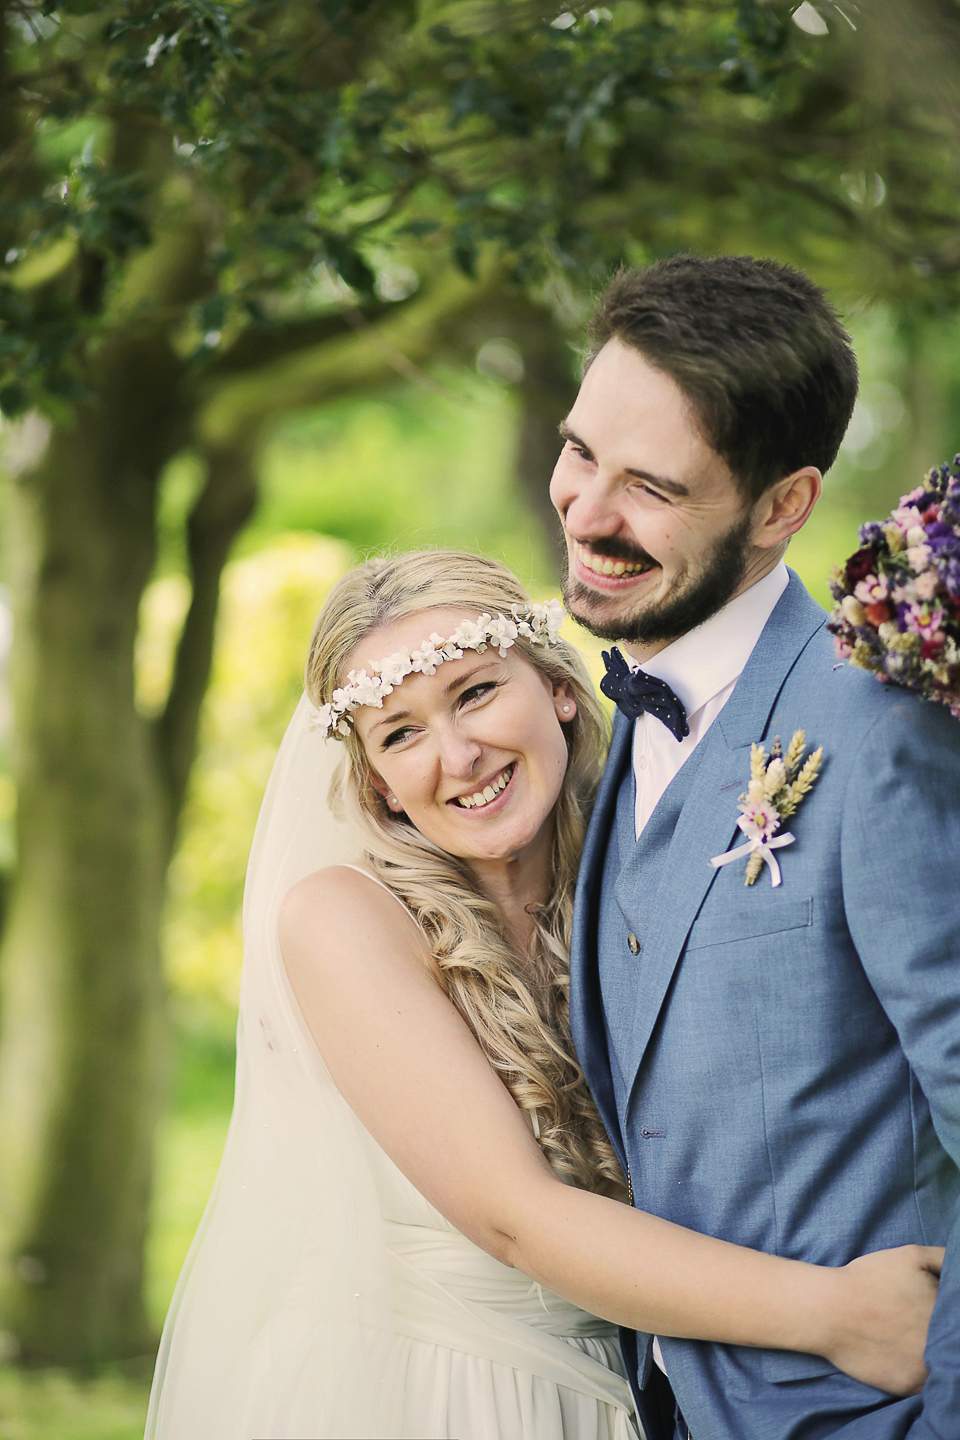 A boho bride and her woodland inspired wedding at Newon Hall, Northumberland. Photography by Helen Russell.